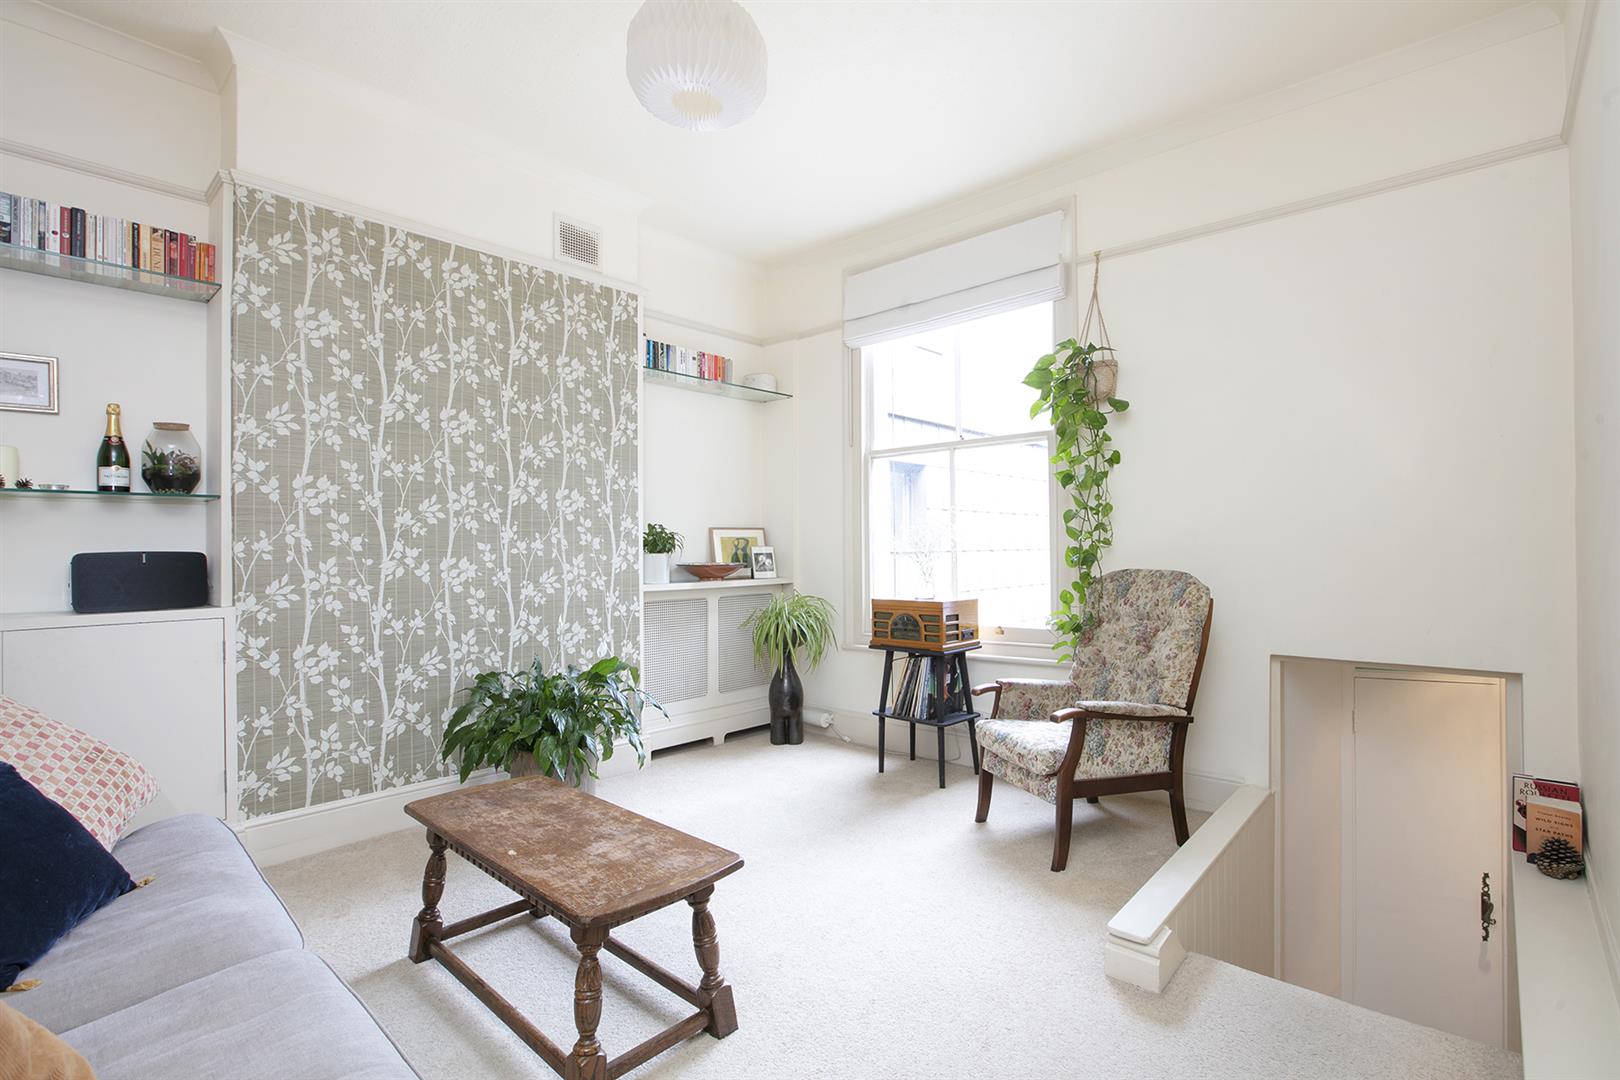 Flat - Conversion Sold in Peckham Road, Camberwell, SE5 859 view2